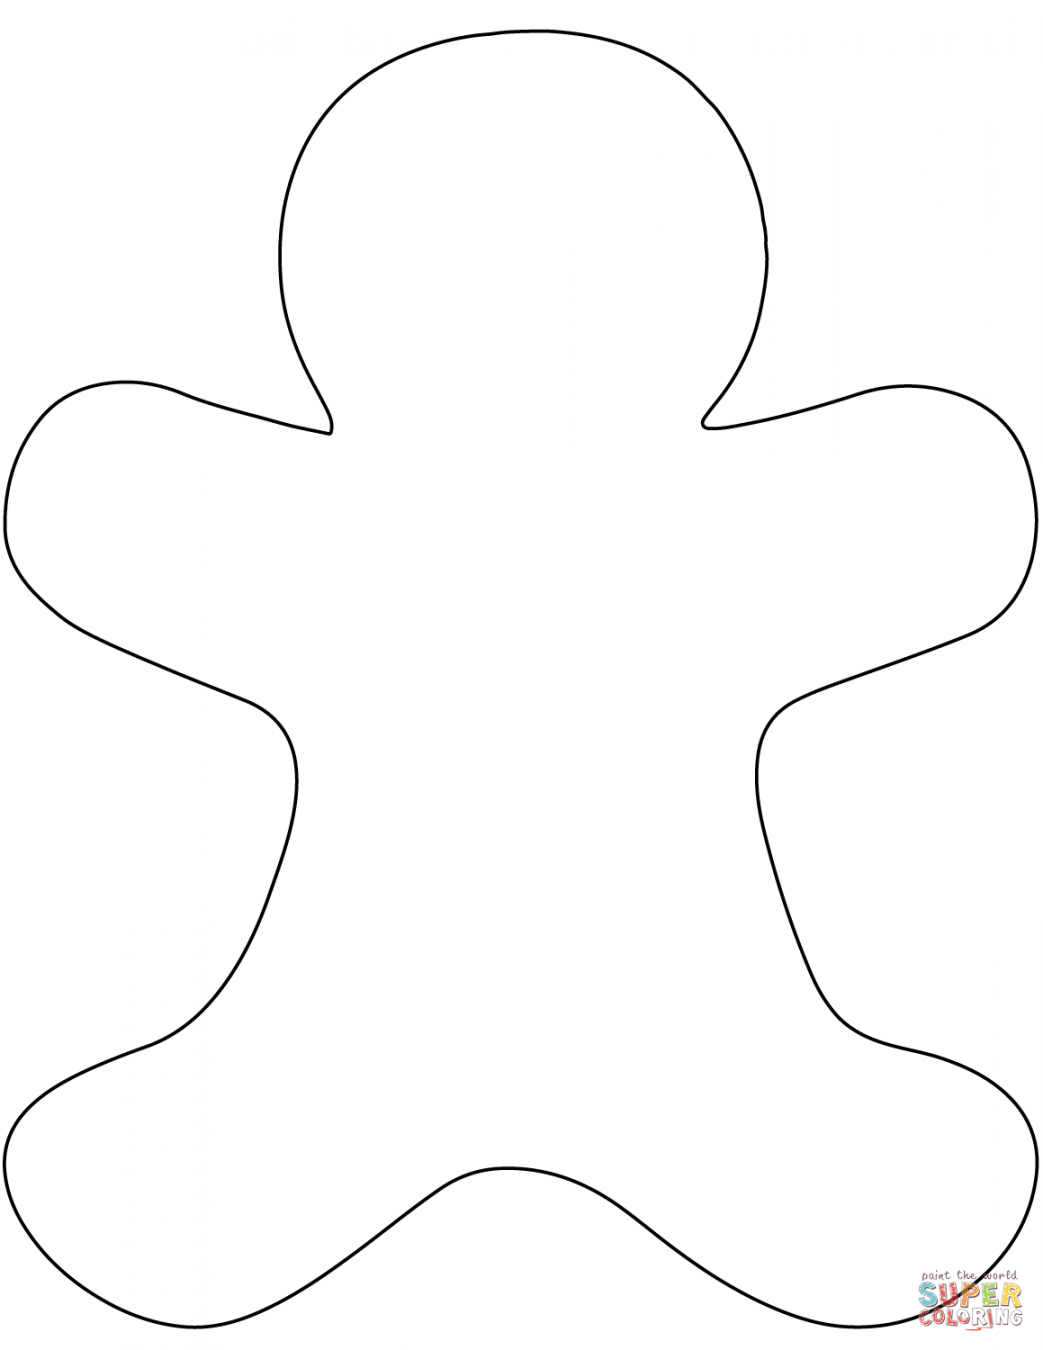 Blank Gingerbread Man coloring page  Free Printable Coloring Pages - FREE Printables - Blank Gingerbread Man